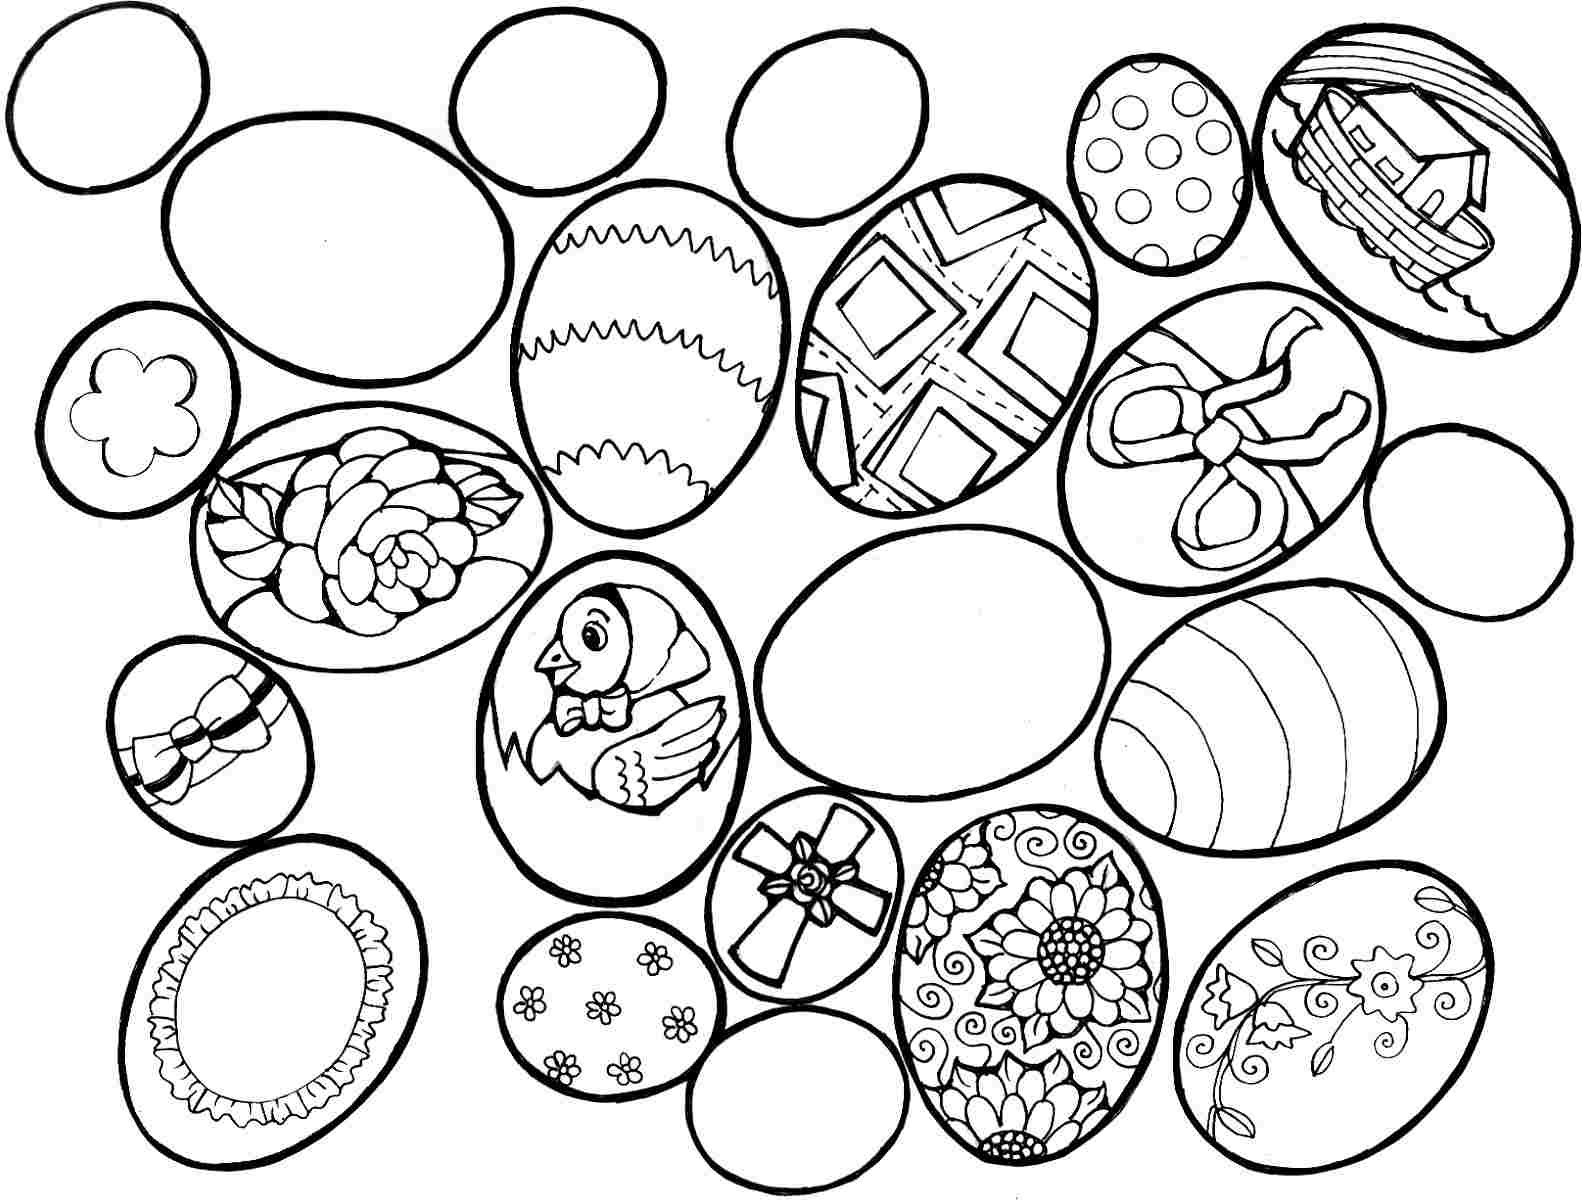 Download Happy Easter Eggs Printable Coloring Pages For Adults, Preschool